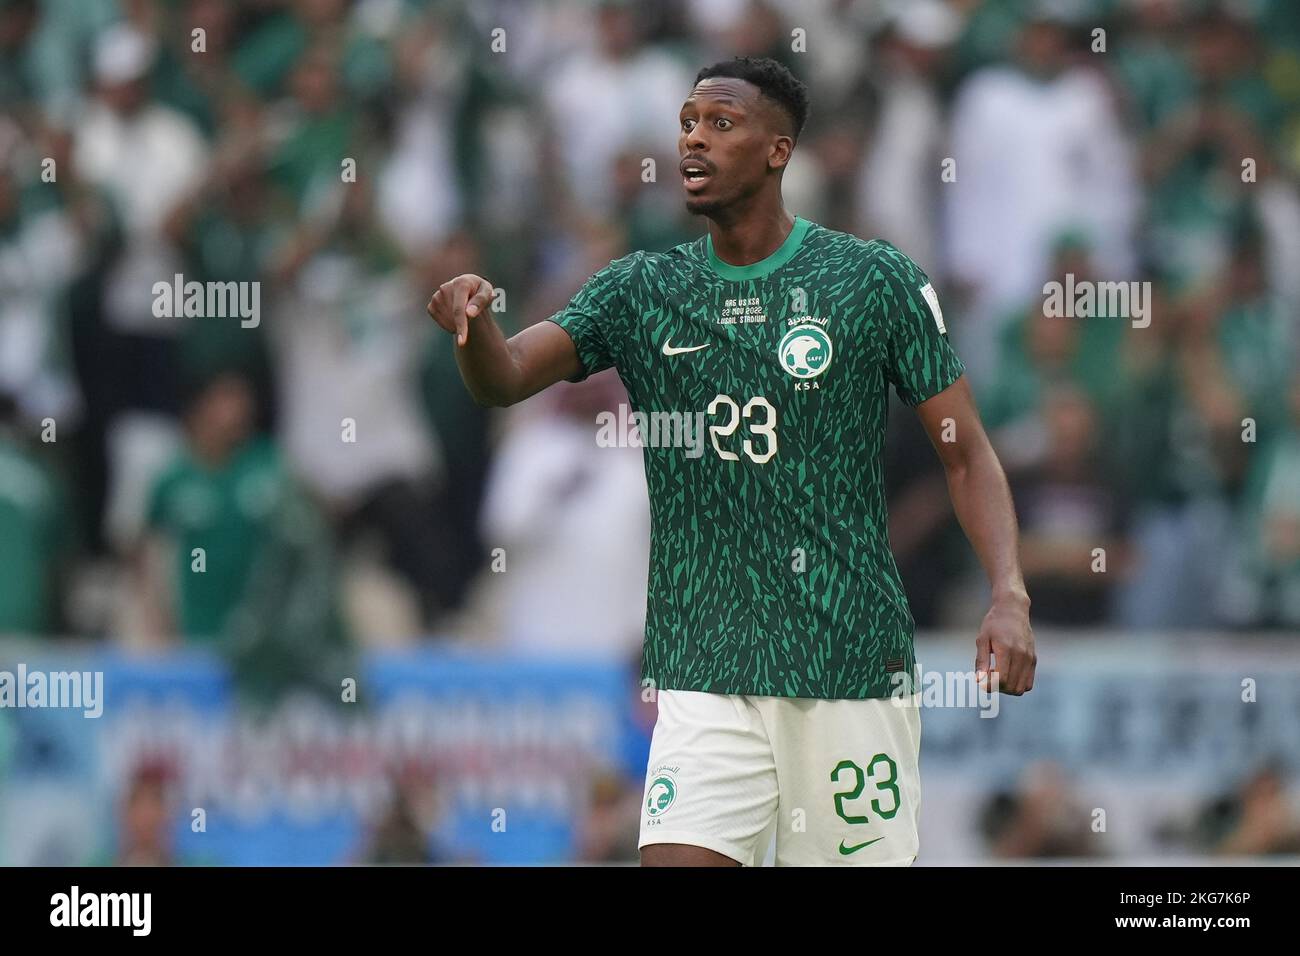 Lusail, Qatar. 22 November, 2022. Kanno Mohamed of Saudi Arabia during the Qatar 2022 World Cup match, group C, date 1, between Argentina and Arabia Saudita played at Lusail Stadium on Nov 22, 2022 in Lusail, Qatar. (Photo by Bagu Blanco / PRESSINPHOTO) Credit: PRESSINPHOTO SPORTS AGENCY/Alamy Live News Stock Photo